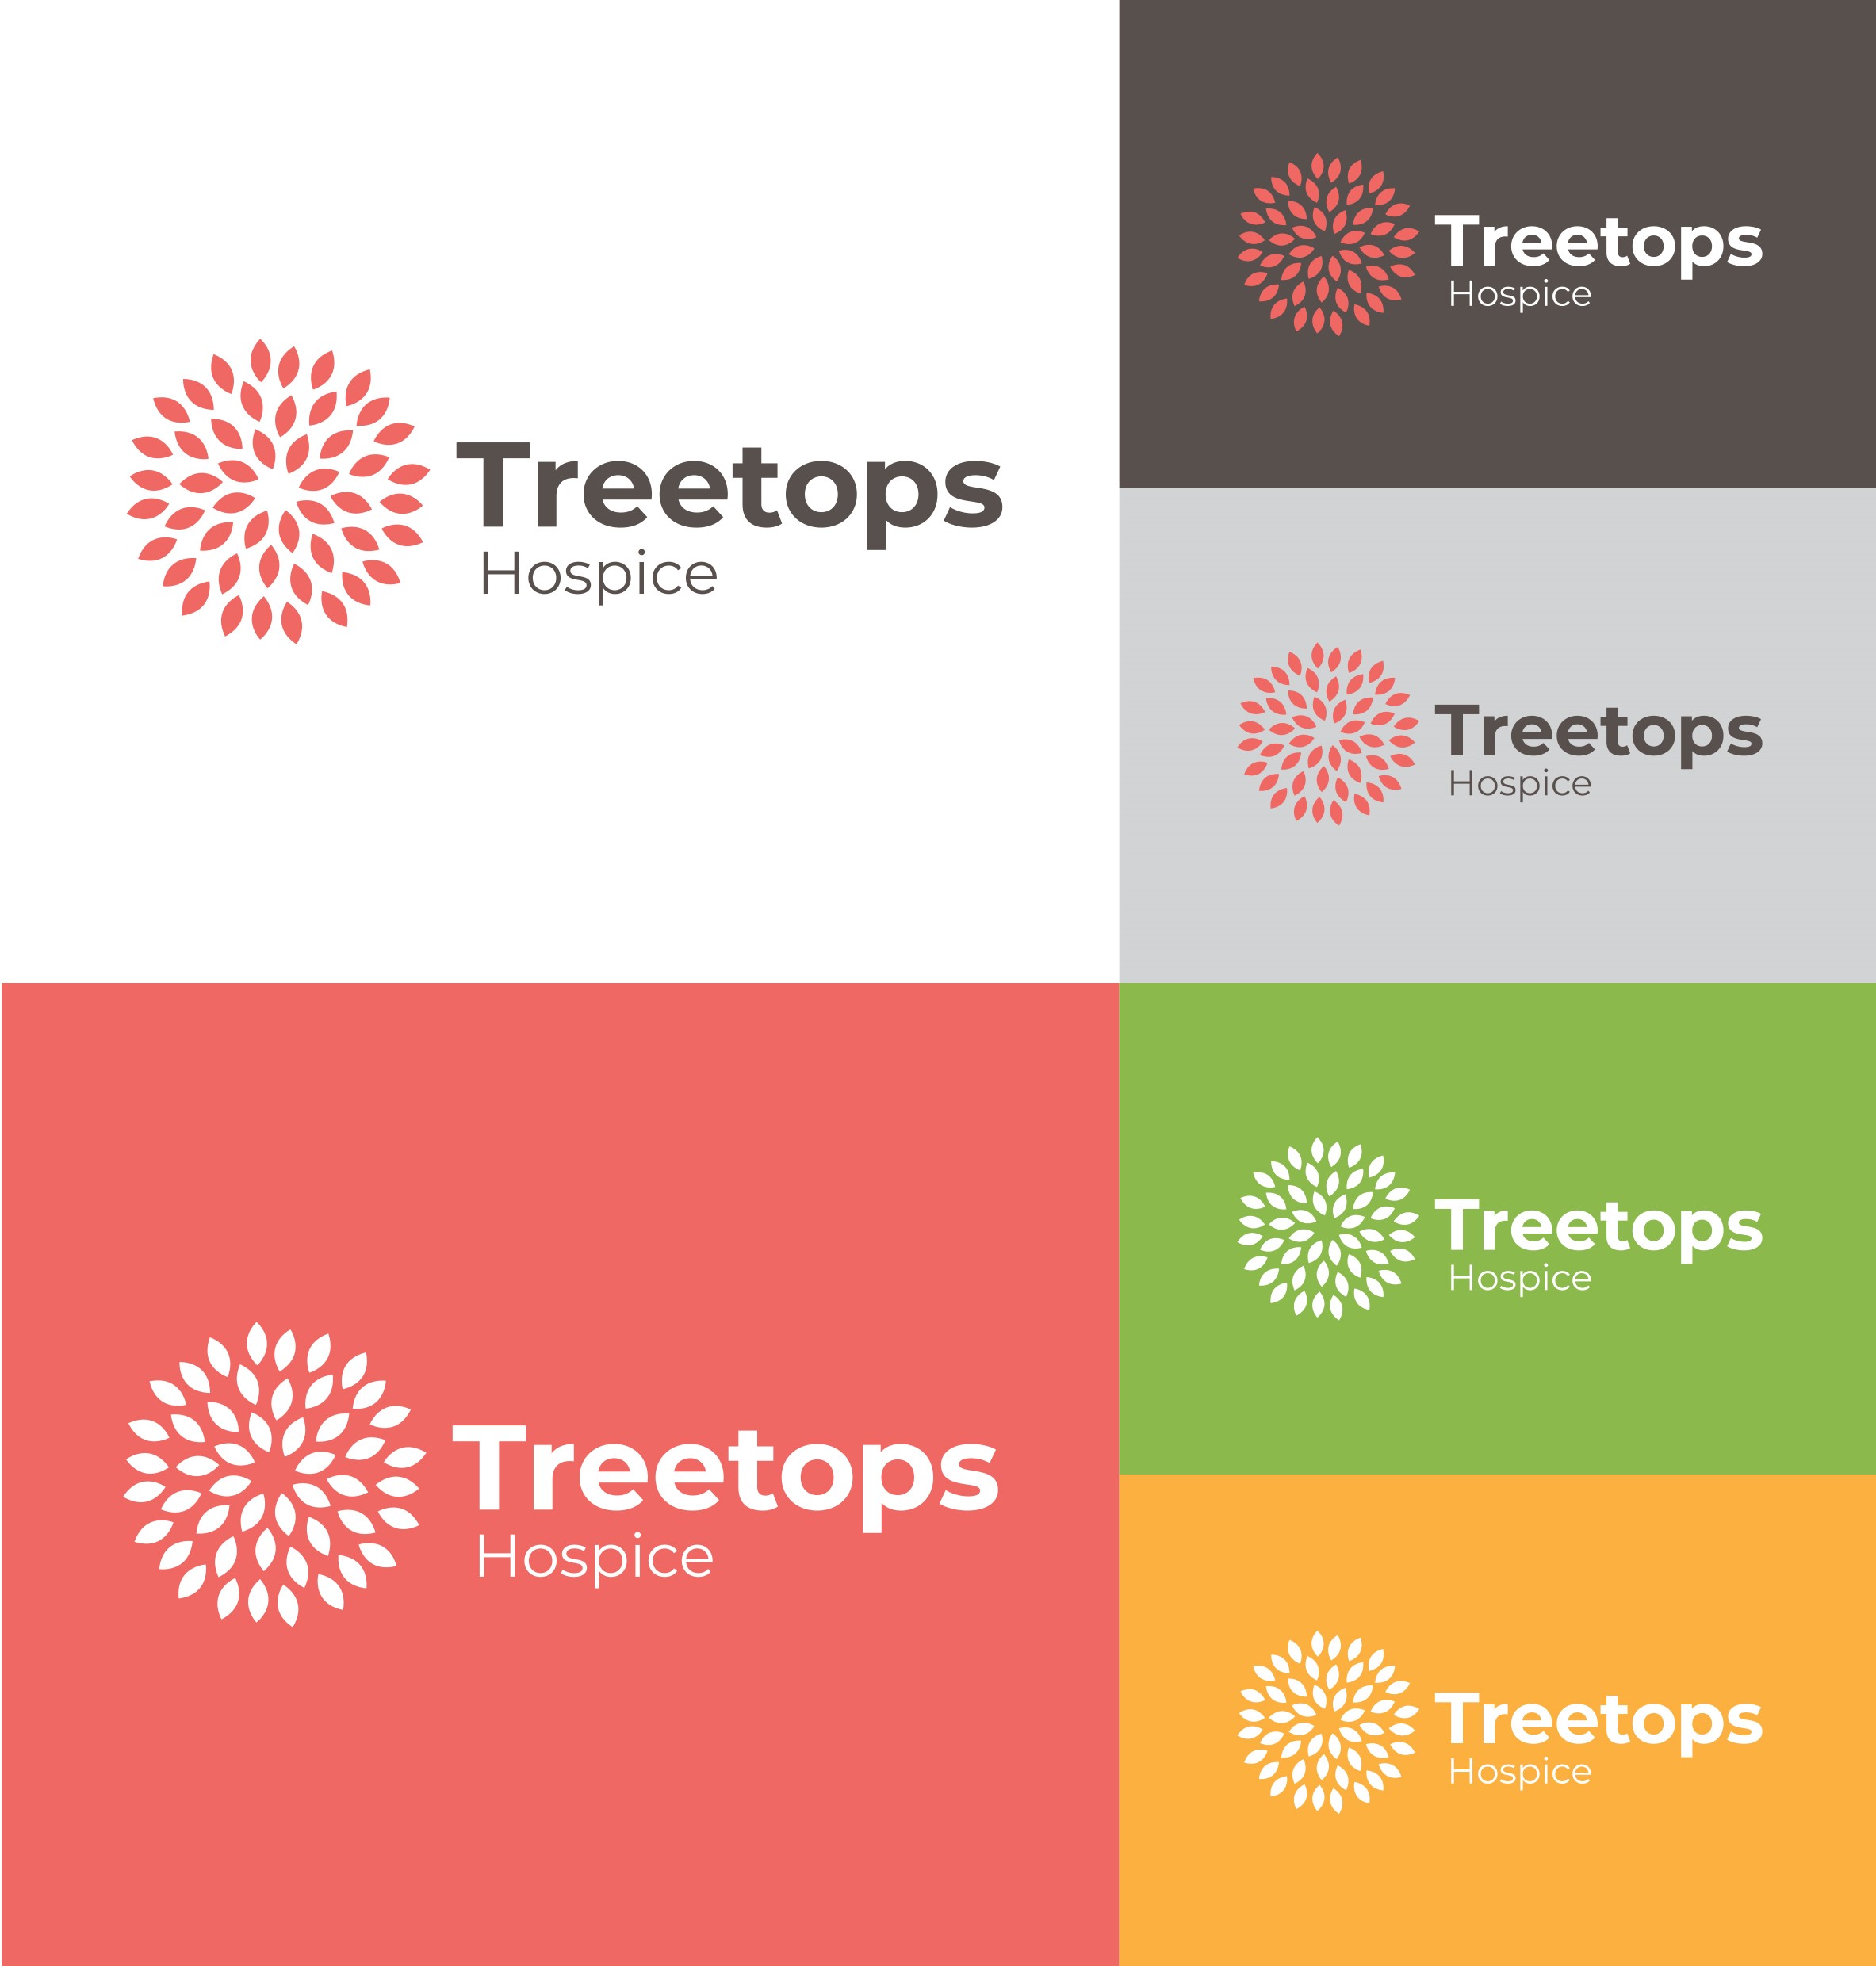 The new logo and our new brand colours inspired by autumn